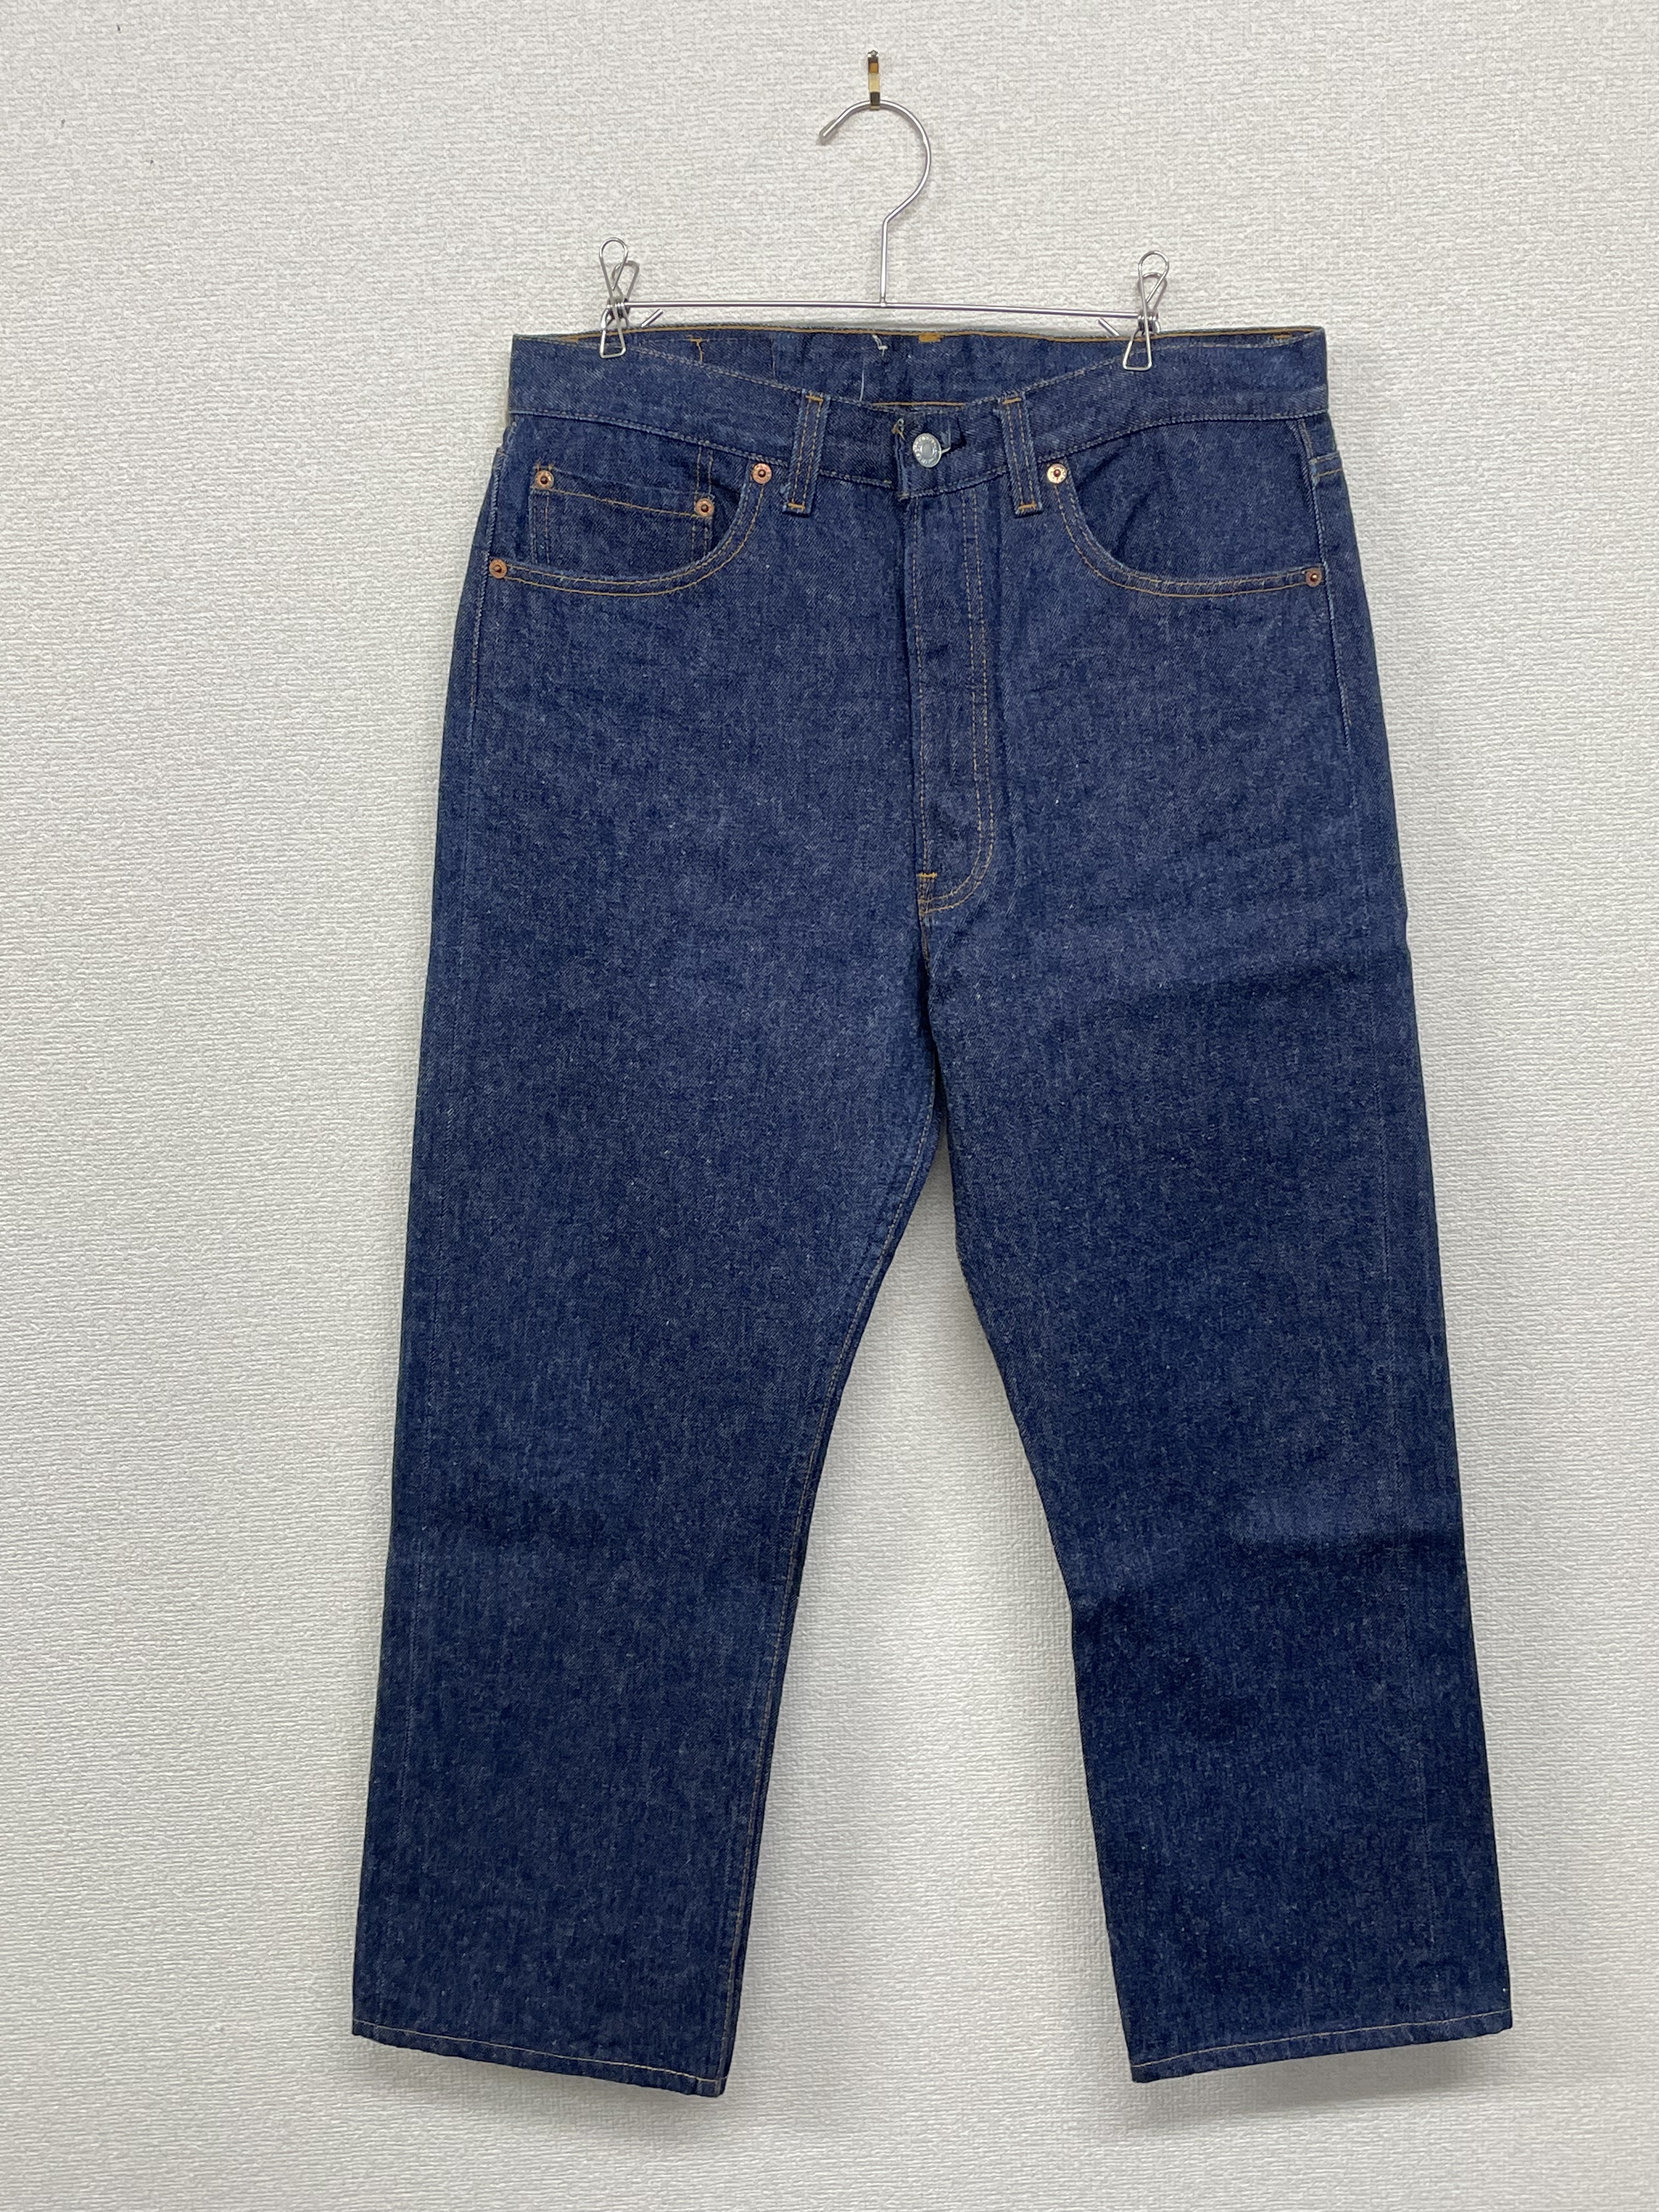 80's 1988 米国製 MADE IN USA リーバイス 552工場 LEVI'S 501 裾 